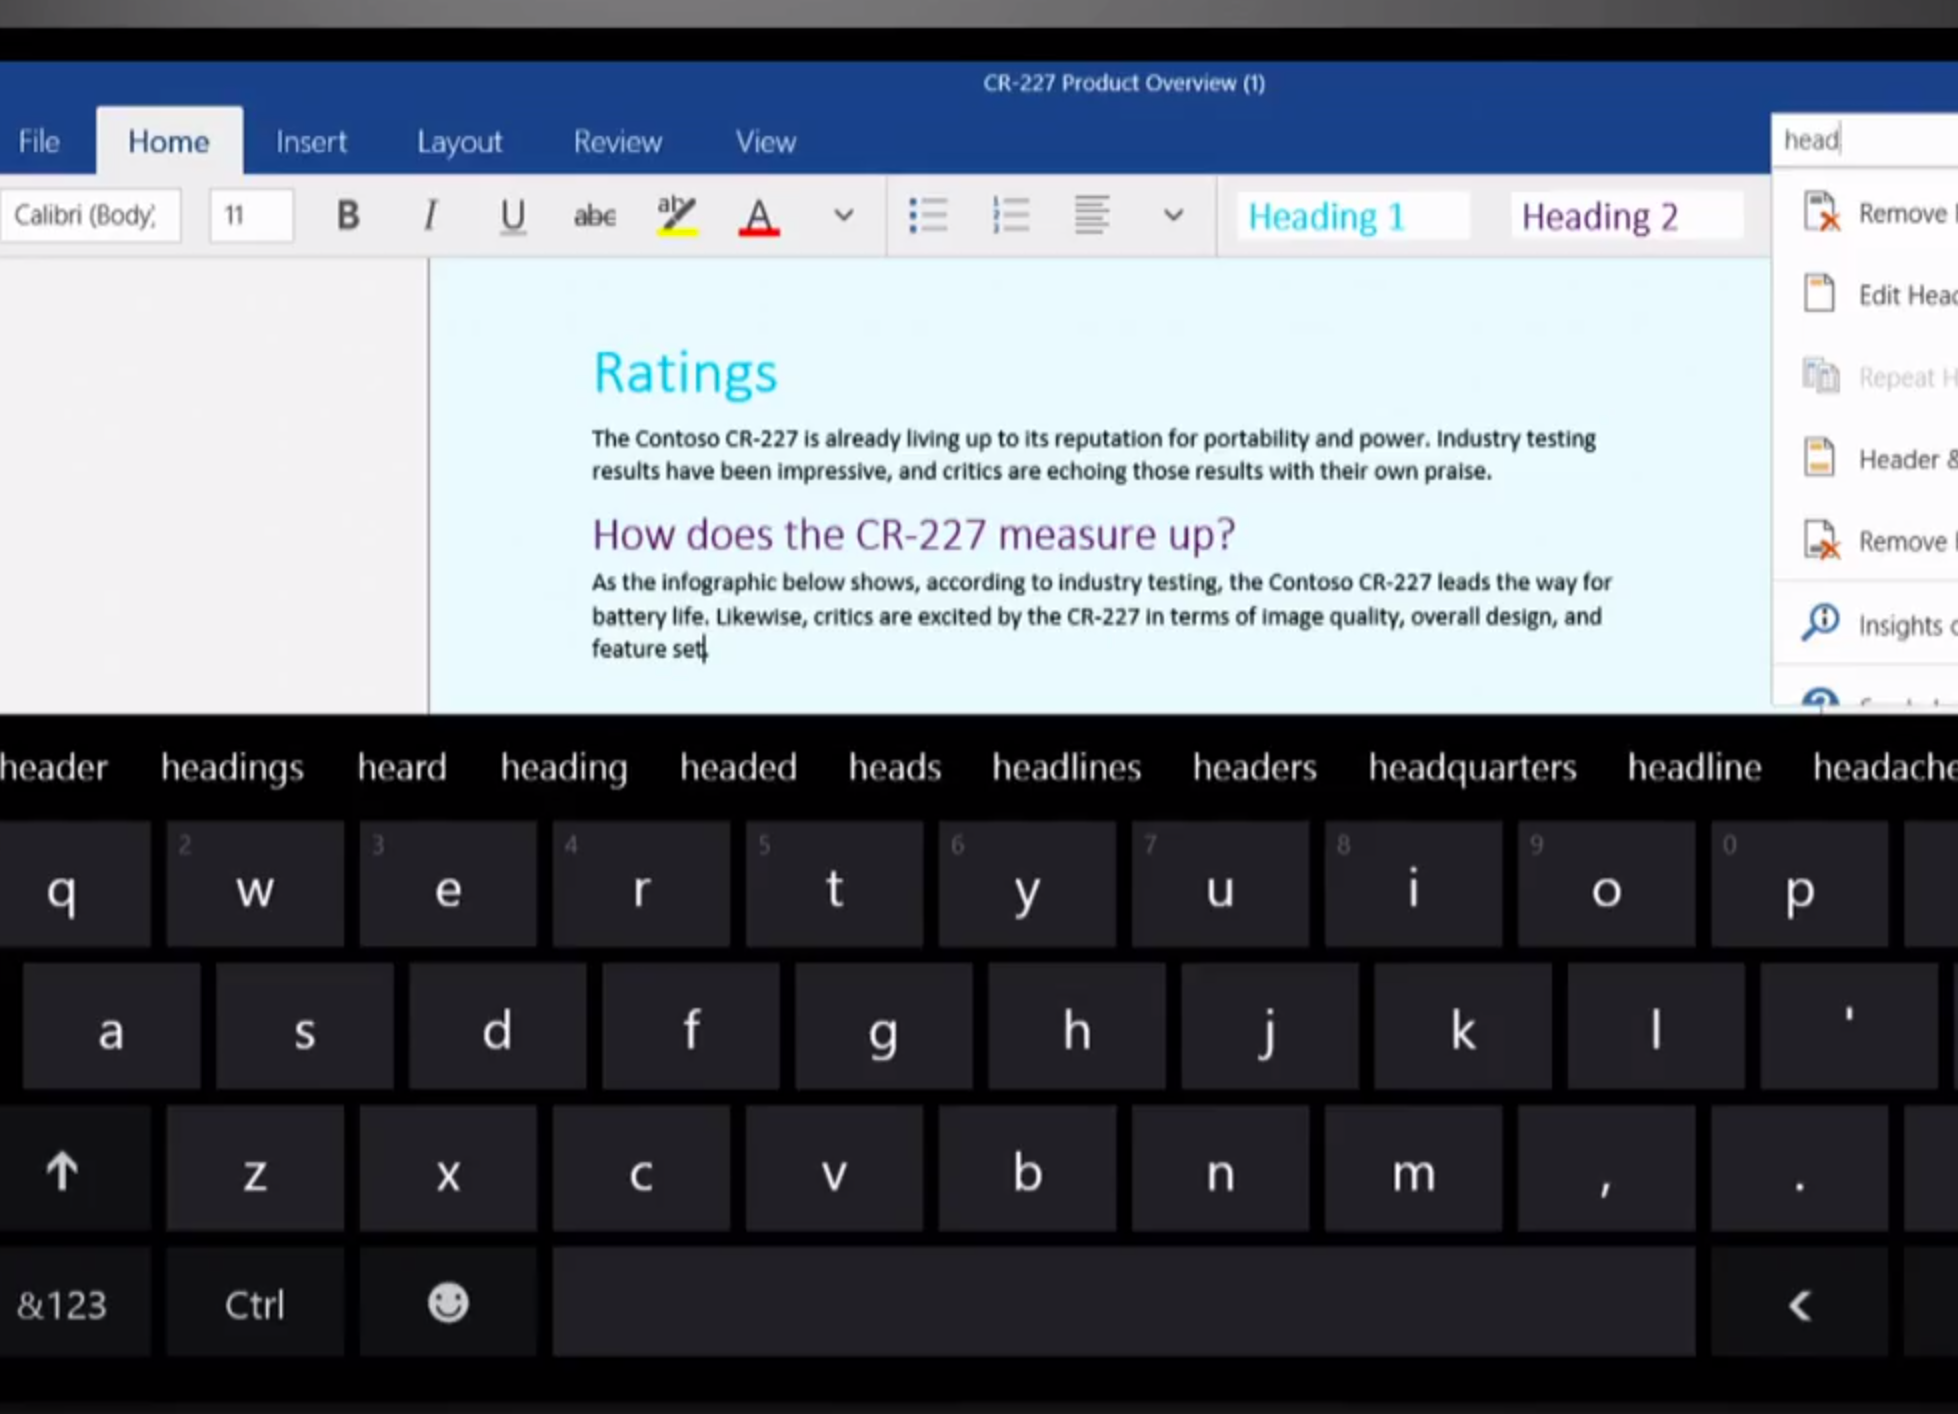 microsoft office universal touch apps here s what to expect from office for windows 10 image 1